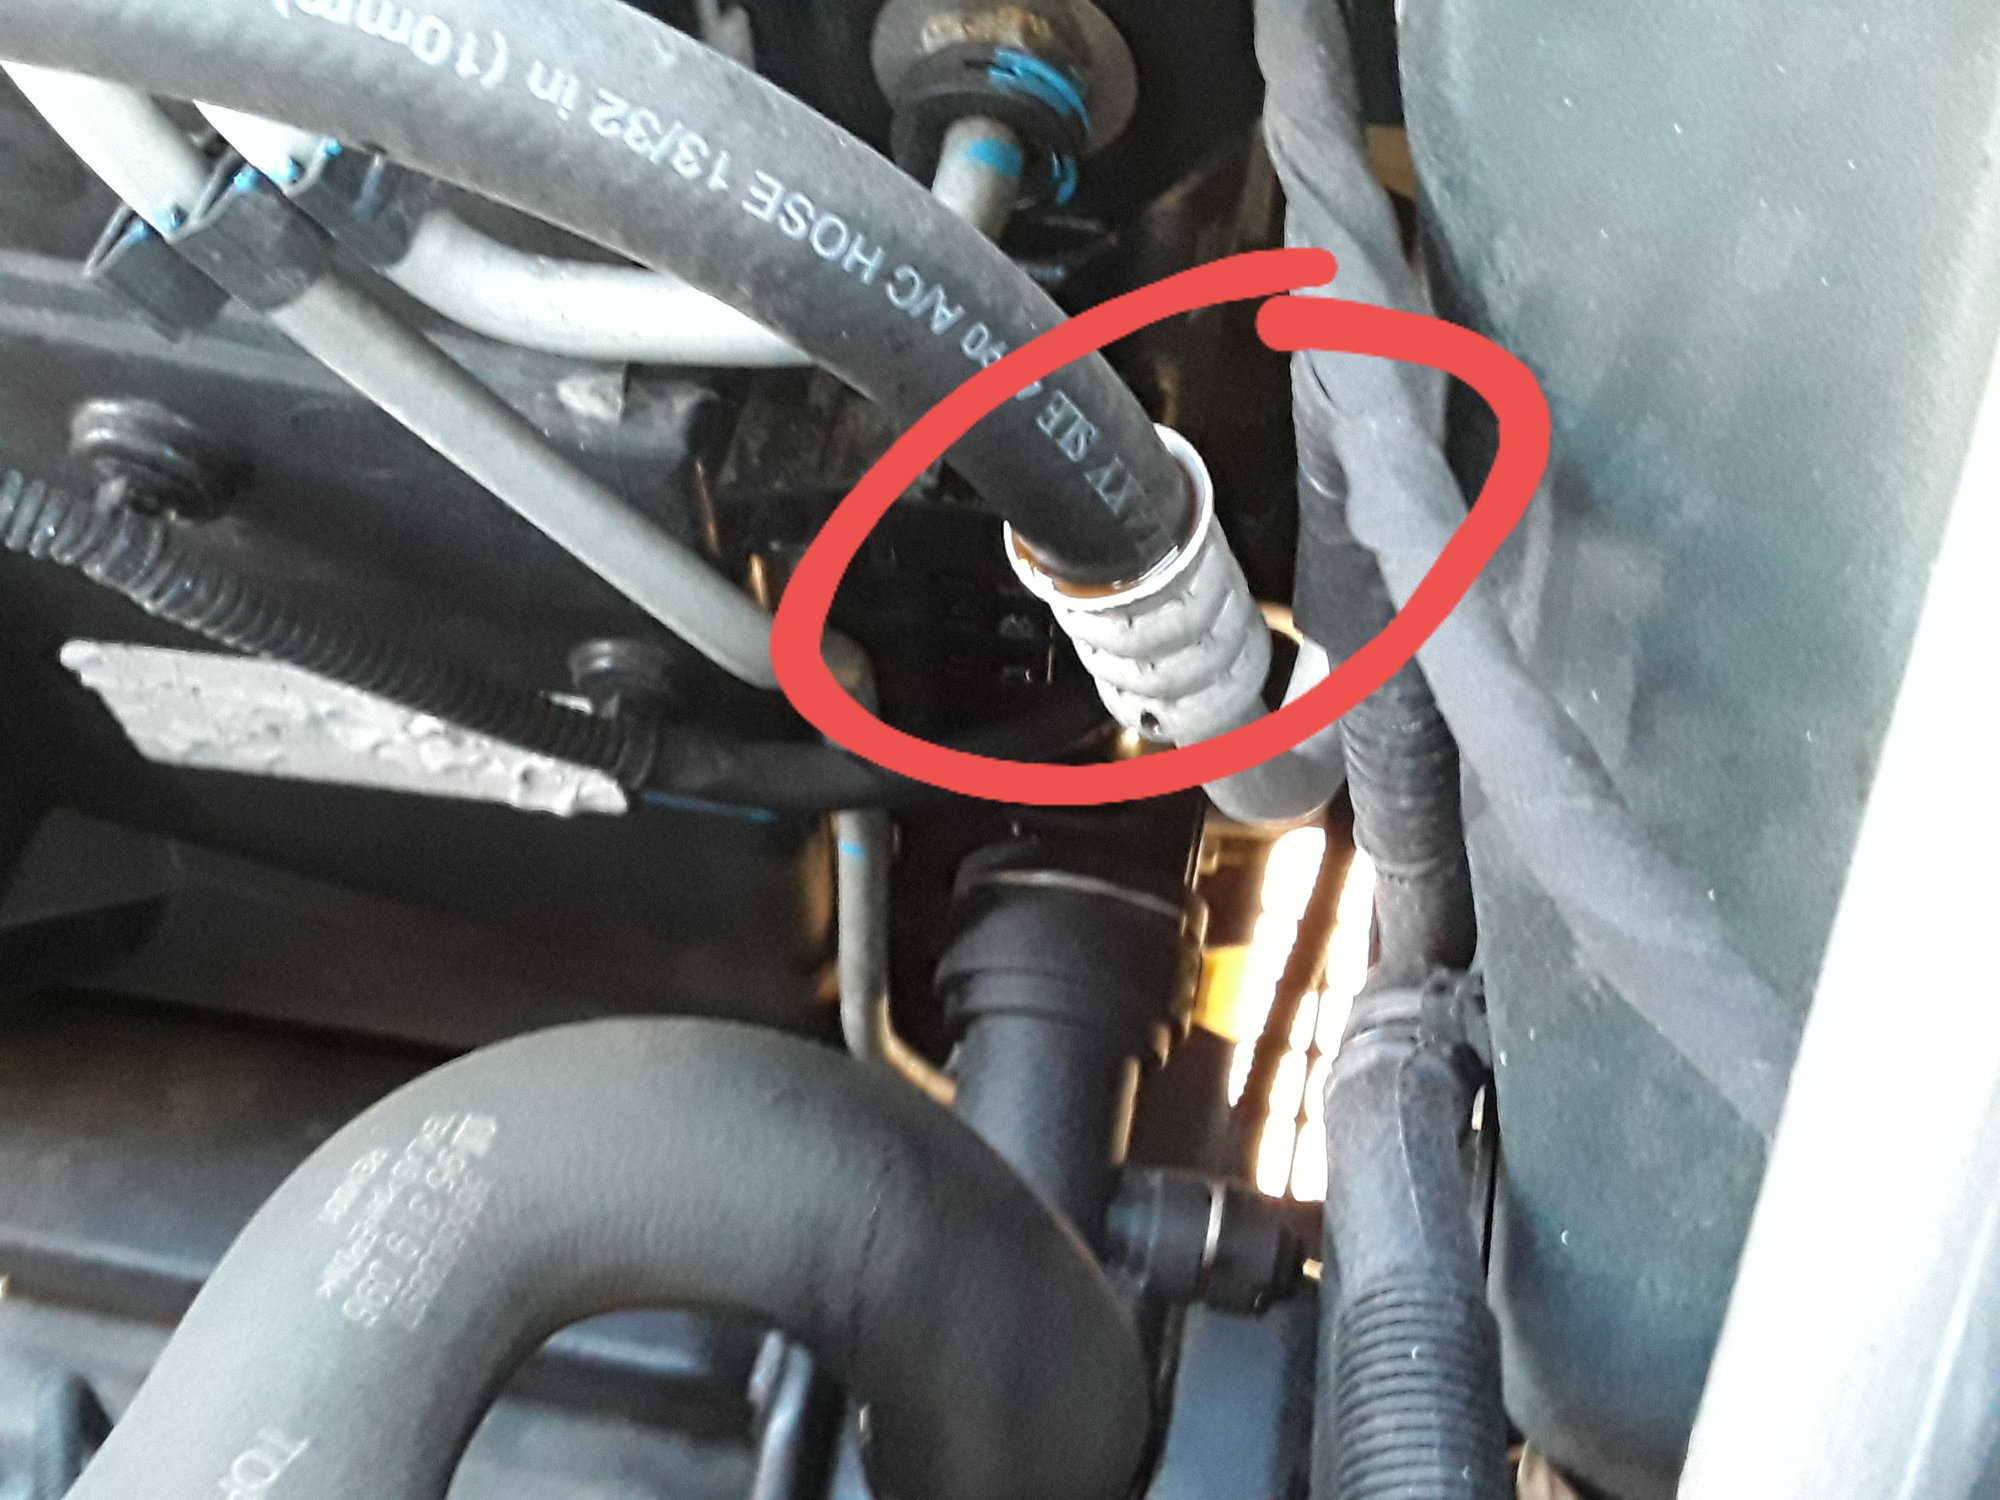 2014 Cruze: Leaking Coolant - Chevrolet Forum - Chevy Enthusiasts Forums